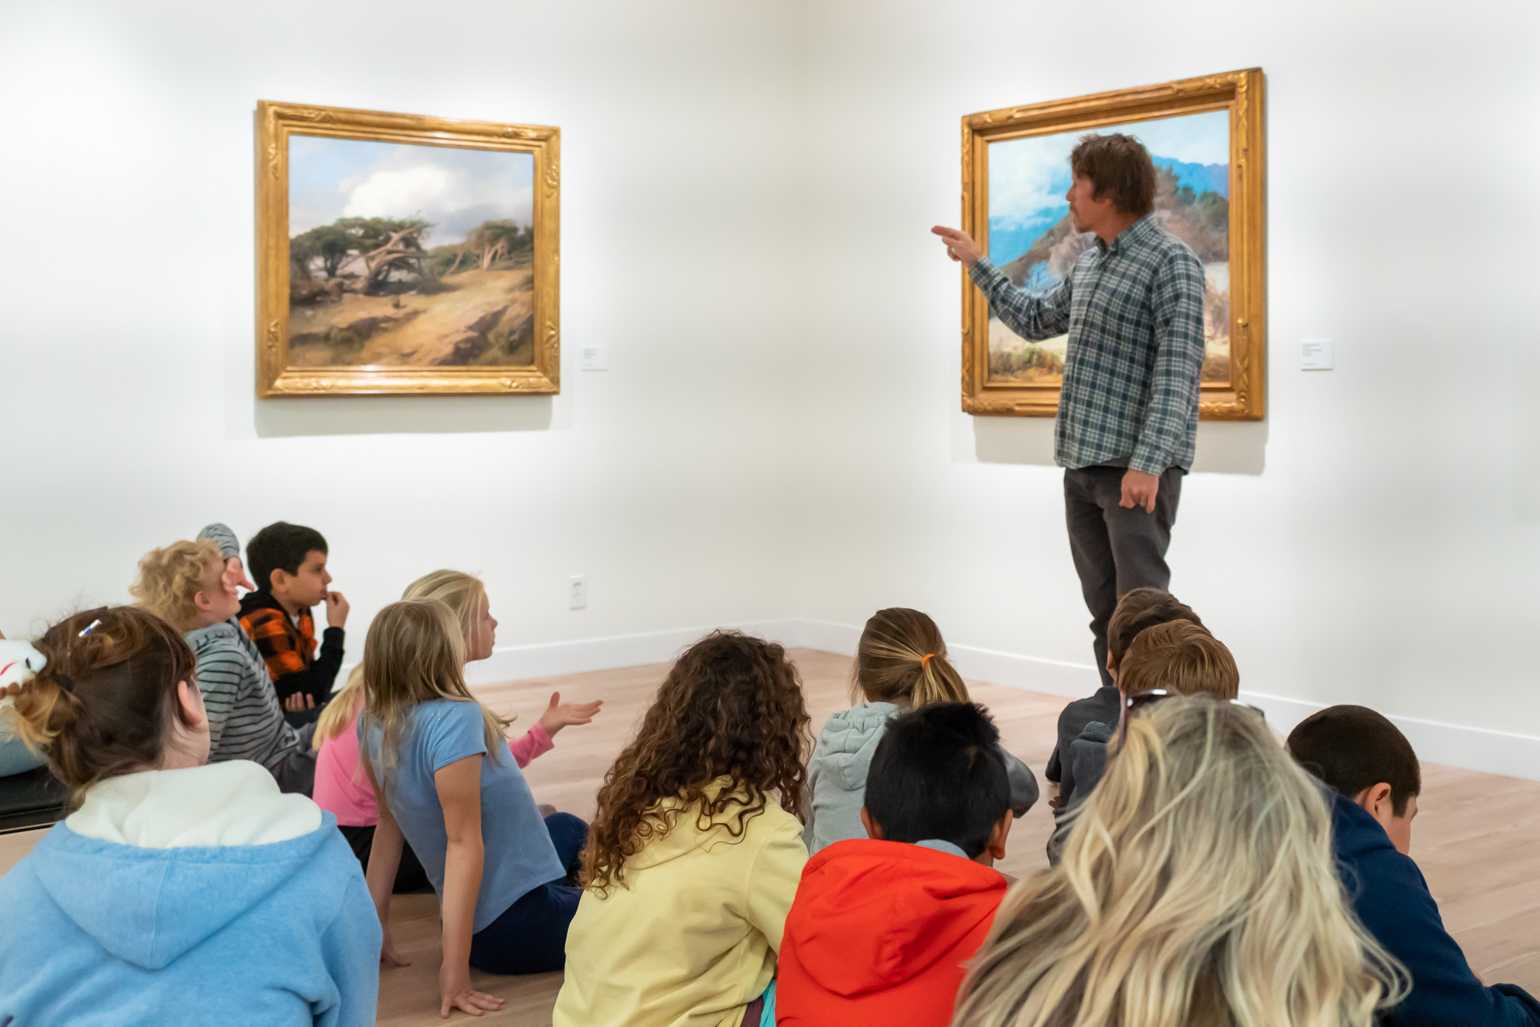 School visit with children seated in the gallery viewing artwork